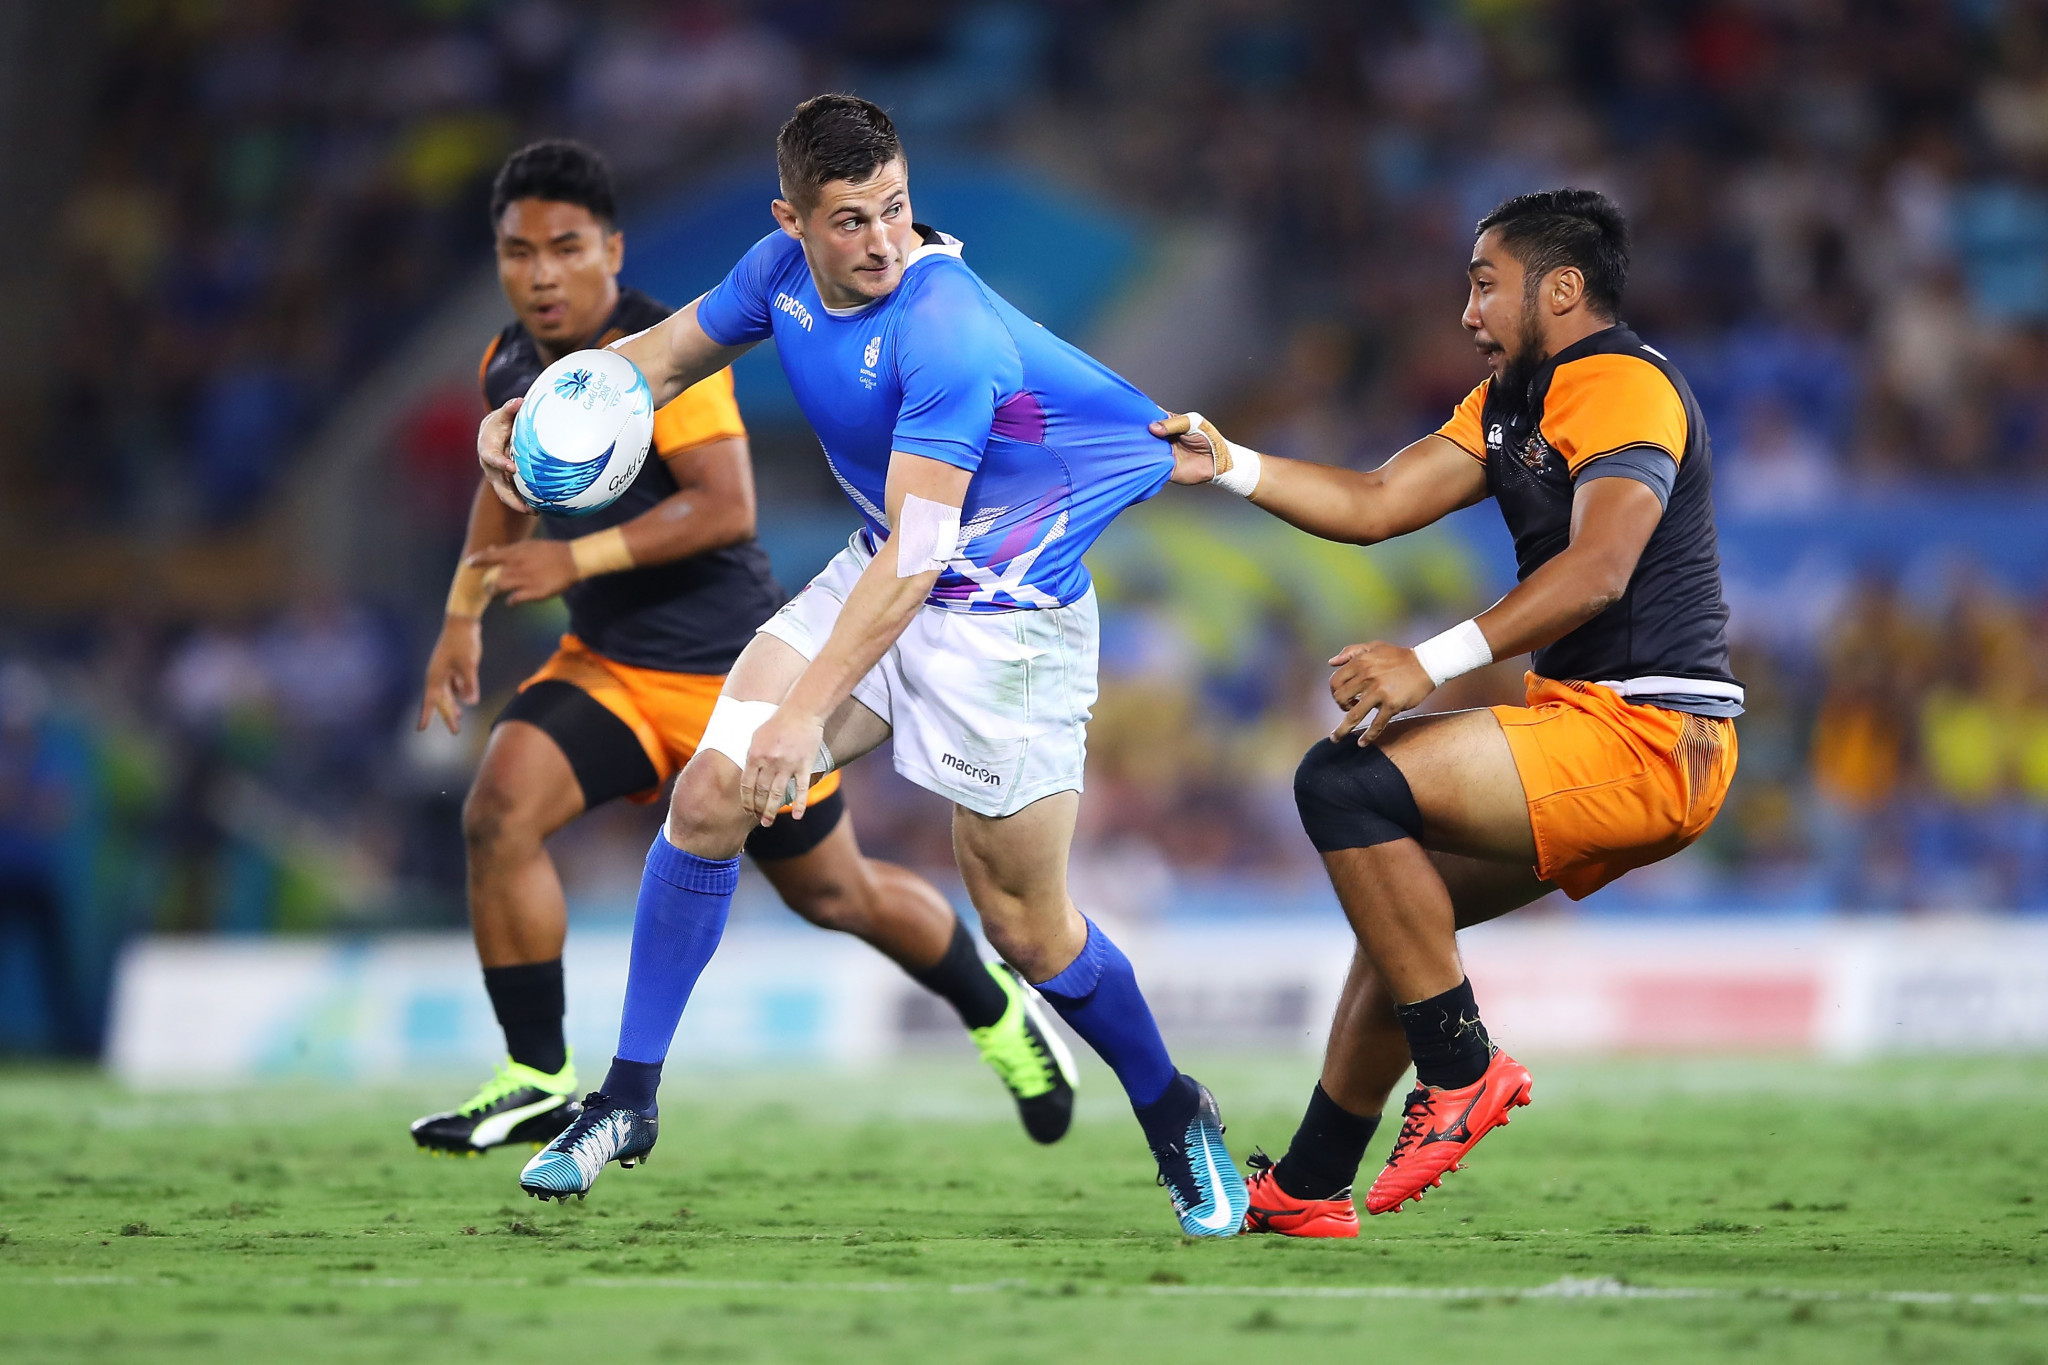 Rugby sevens at the Commonwealth Games